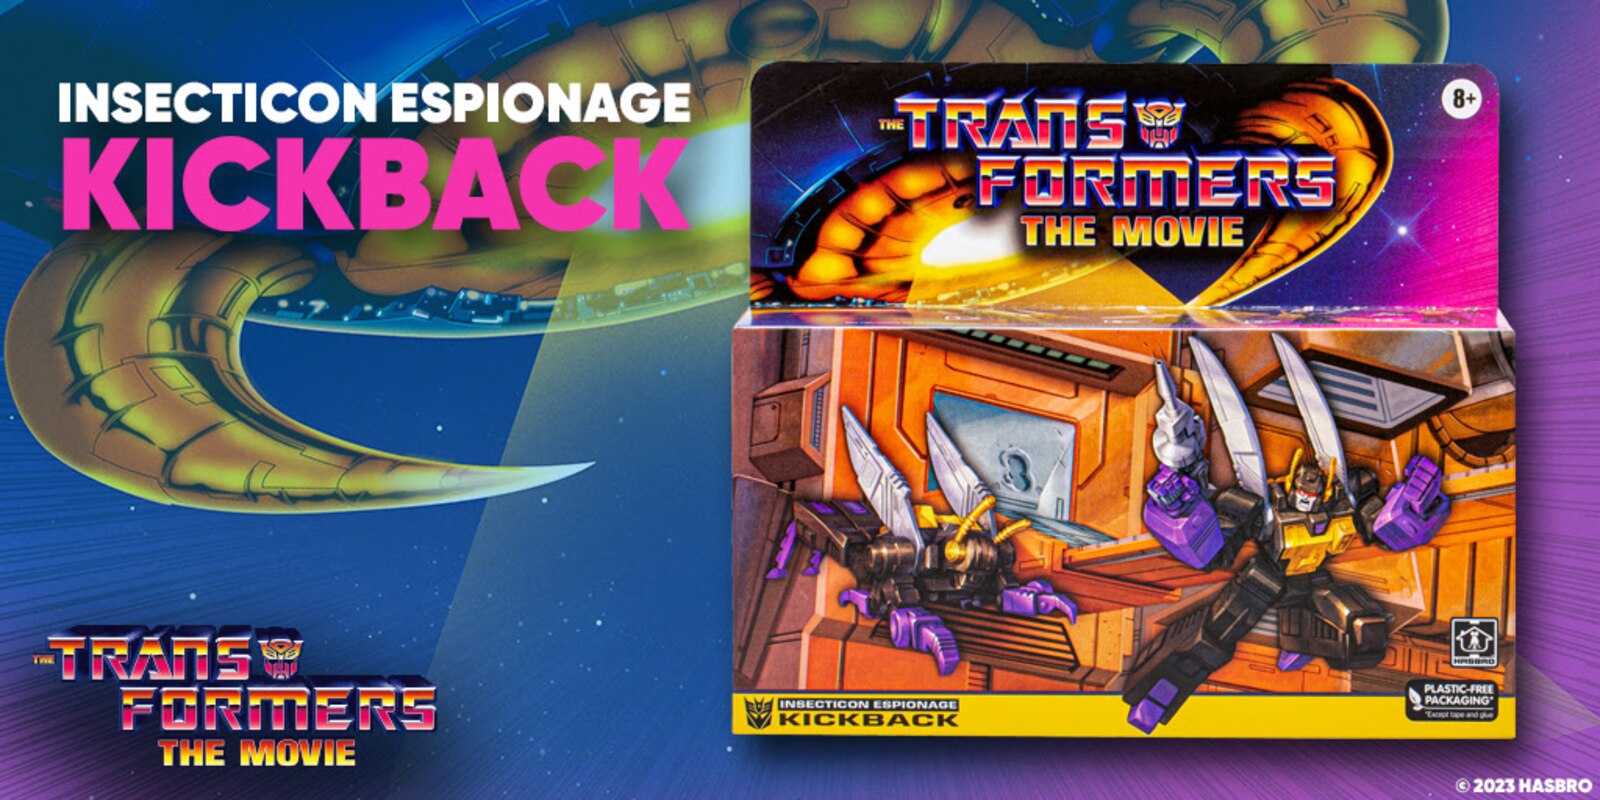 Retro Kickback Official Images & Details for 1986 Transformers The Movie G1 Walmart Exclusive